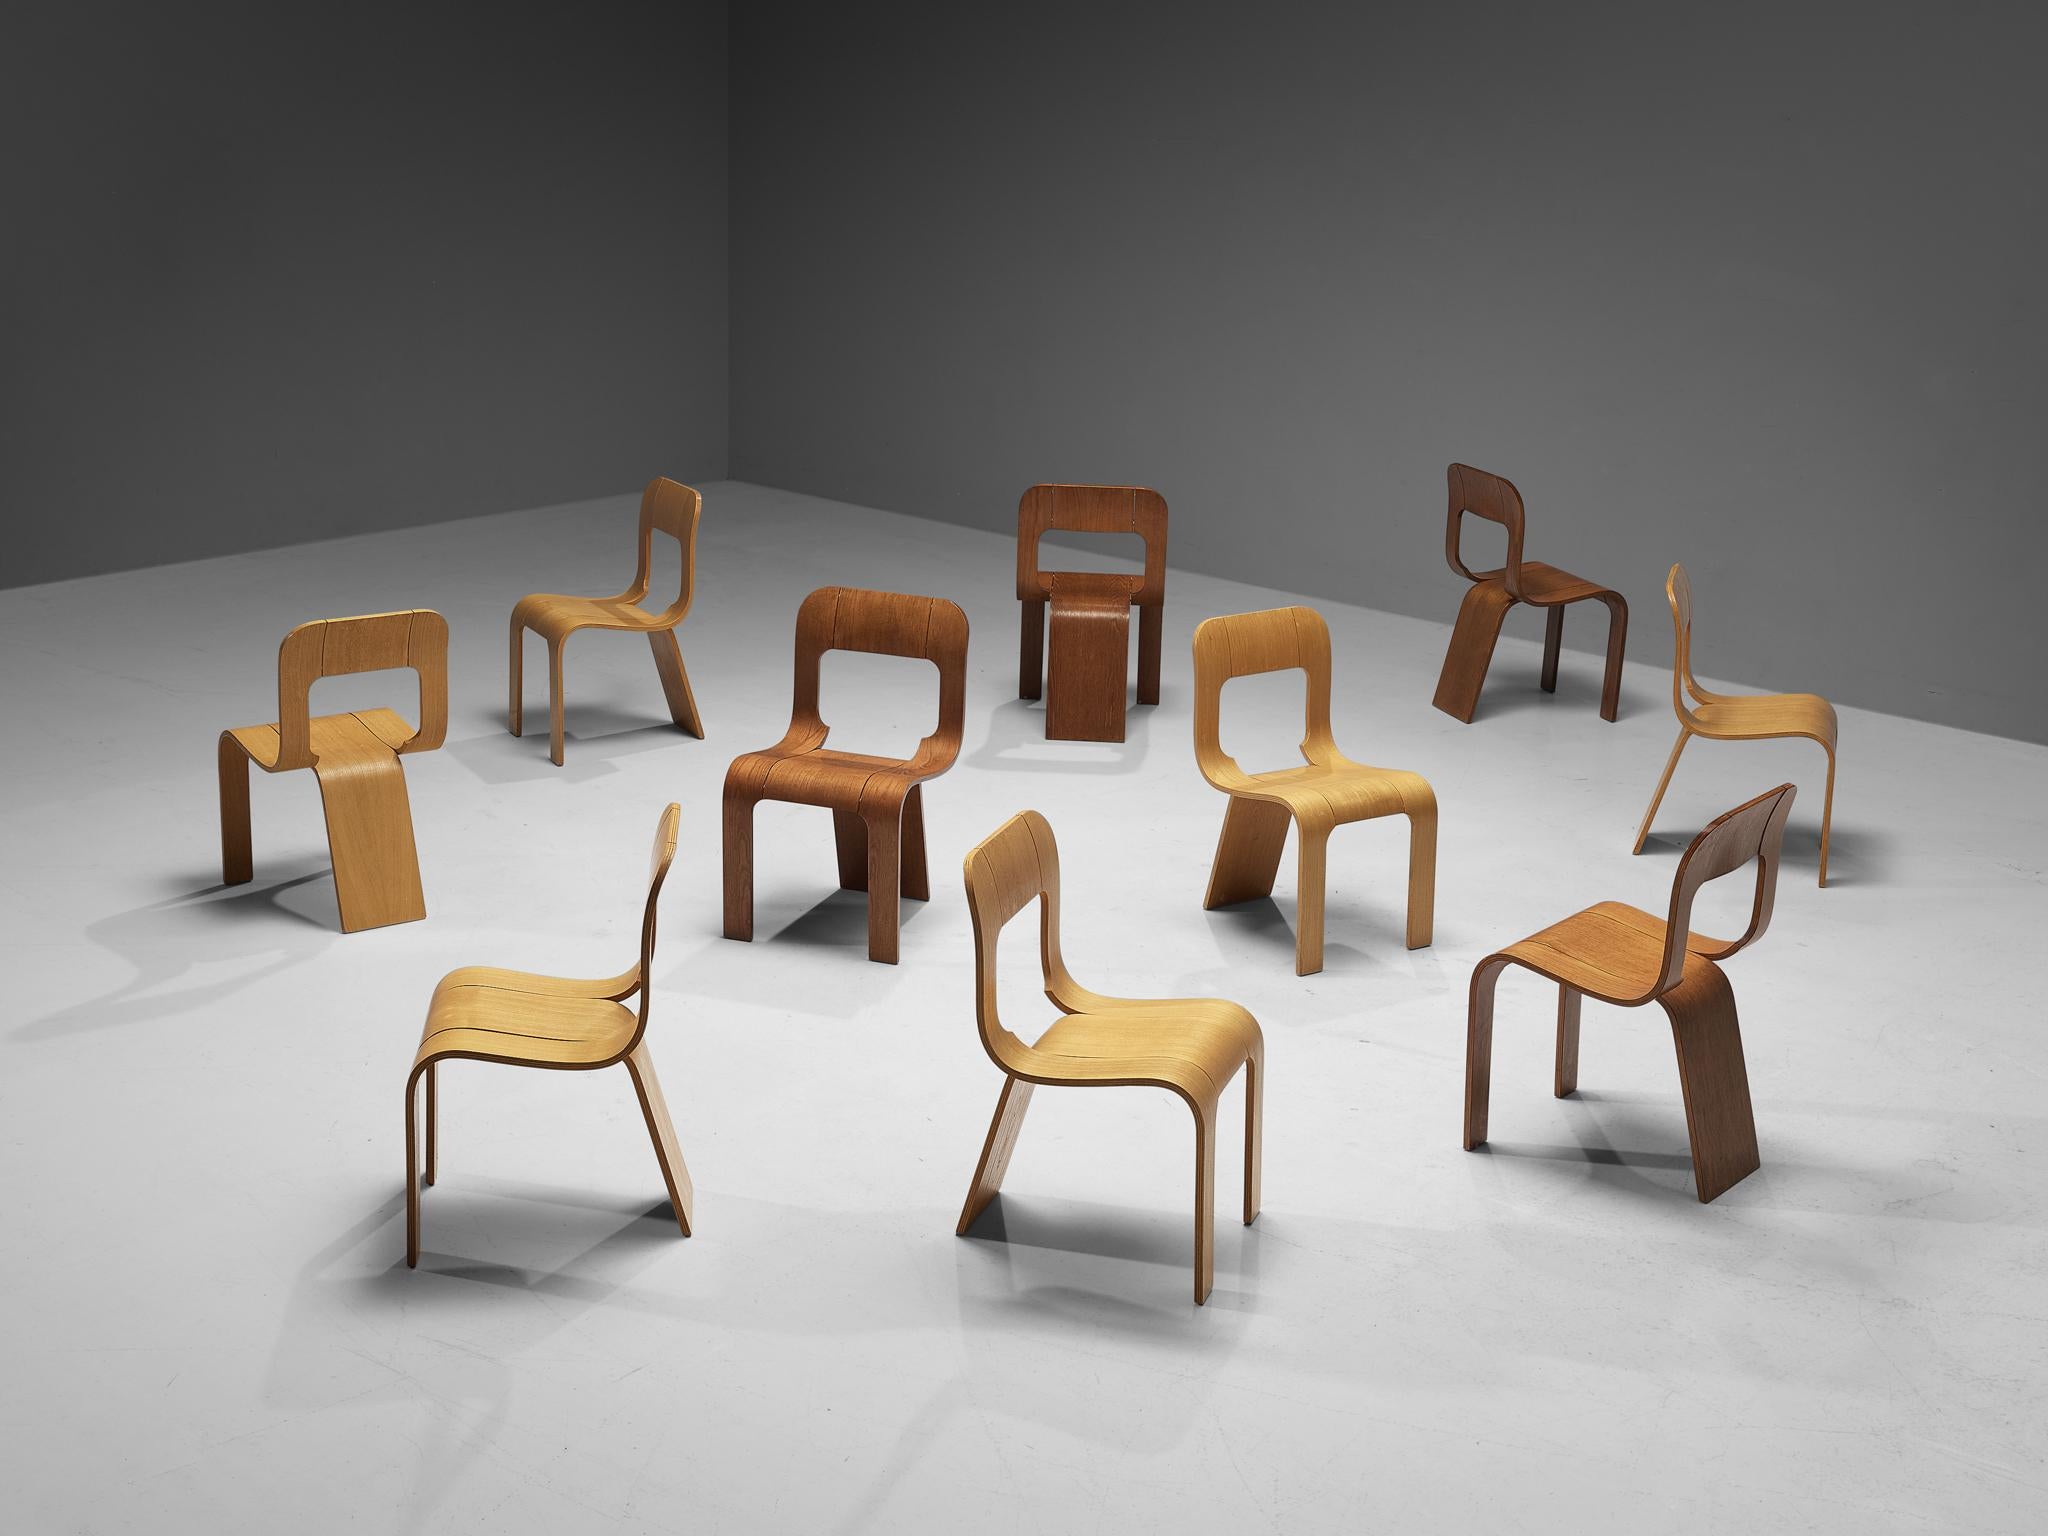 Gigi Sabadin for Stilwood, set of ten chairs, plywood, Italy, 1970s.

An inventive design by the Italian Gigi Sabadin, these chairs are made of bent plywood with a veneered finish. The organic design seems to be made out of one piece, which is cut